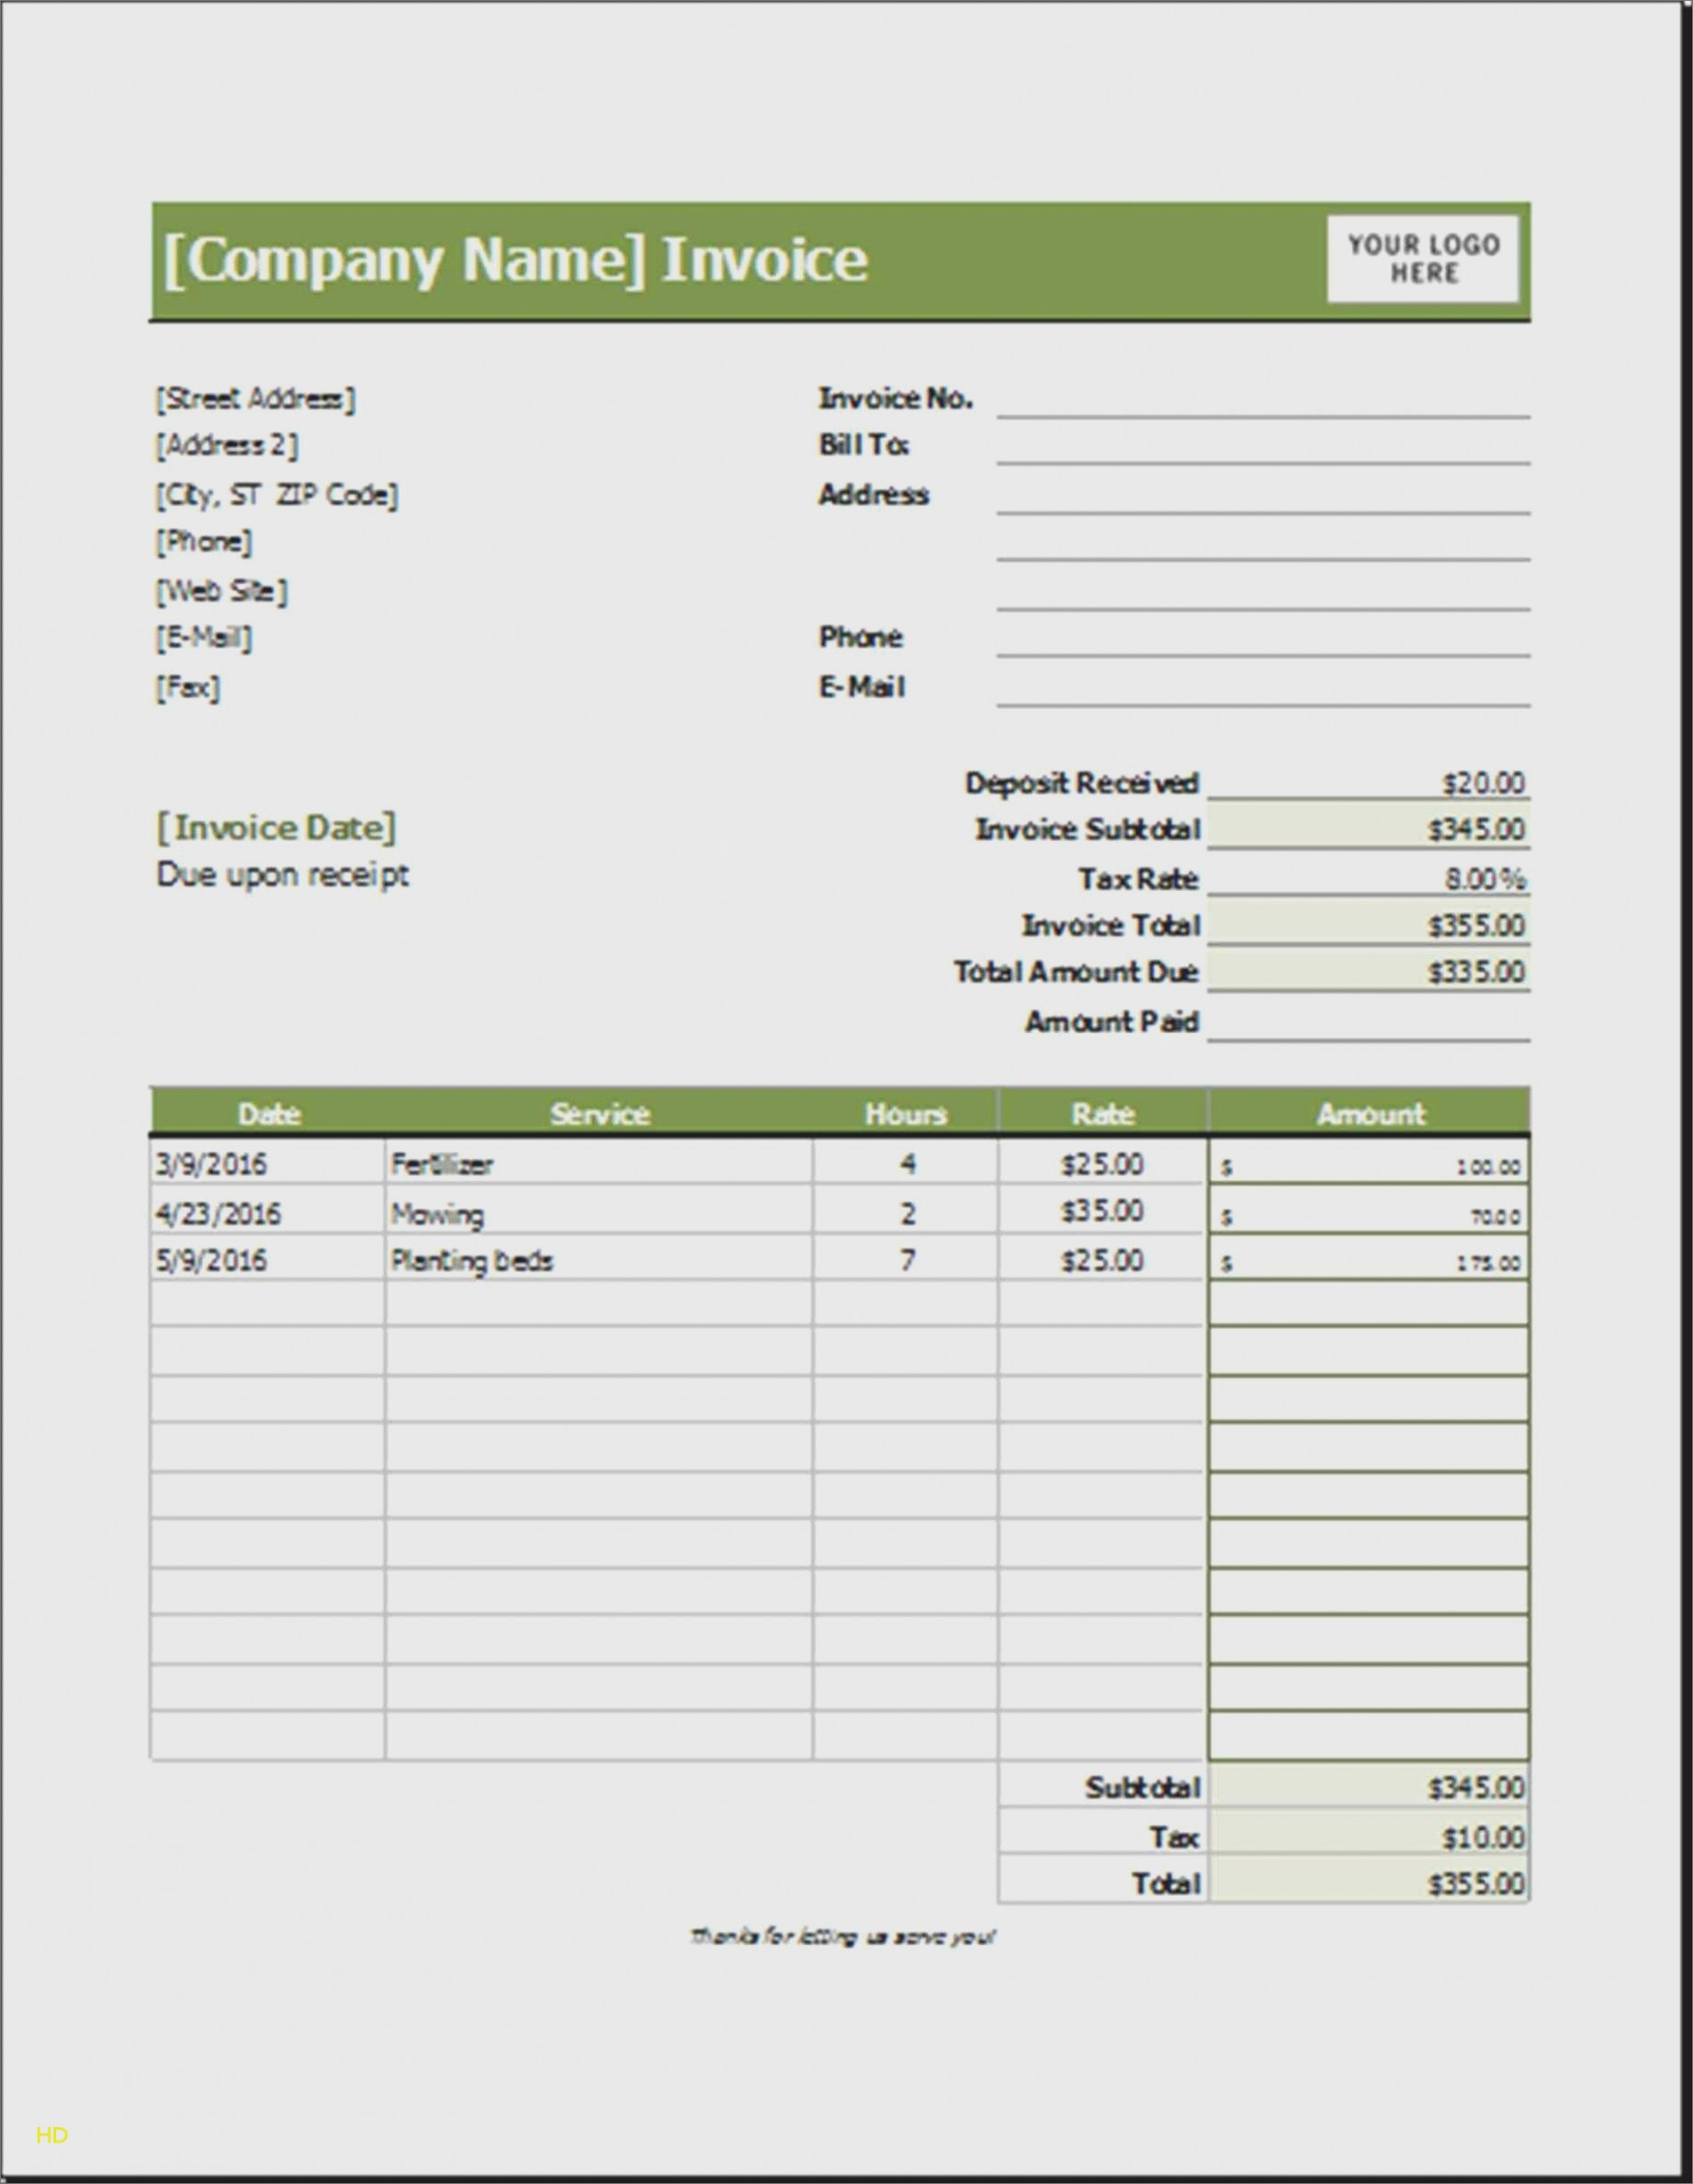 You Will Never Believe  Realty Executives Mi  Invoice And Resume intended for Lawn Care Invoice Template Word